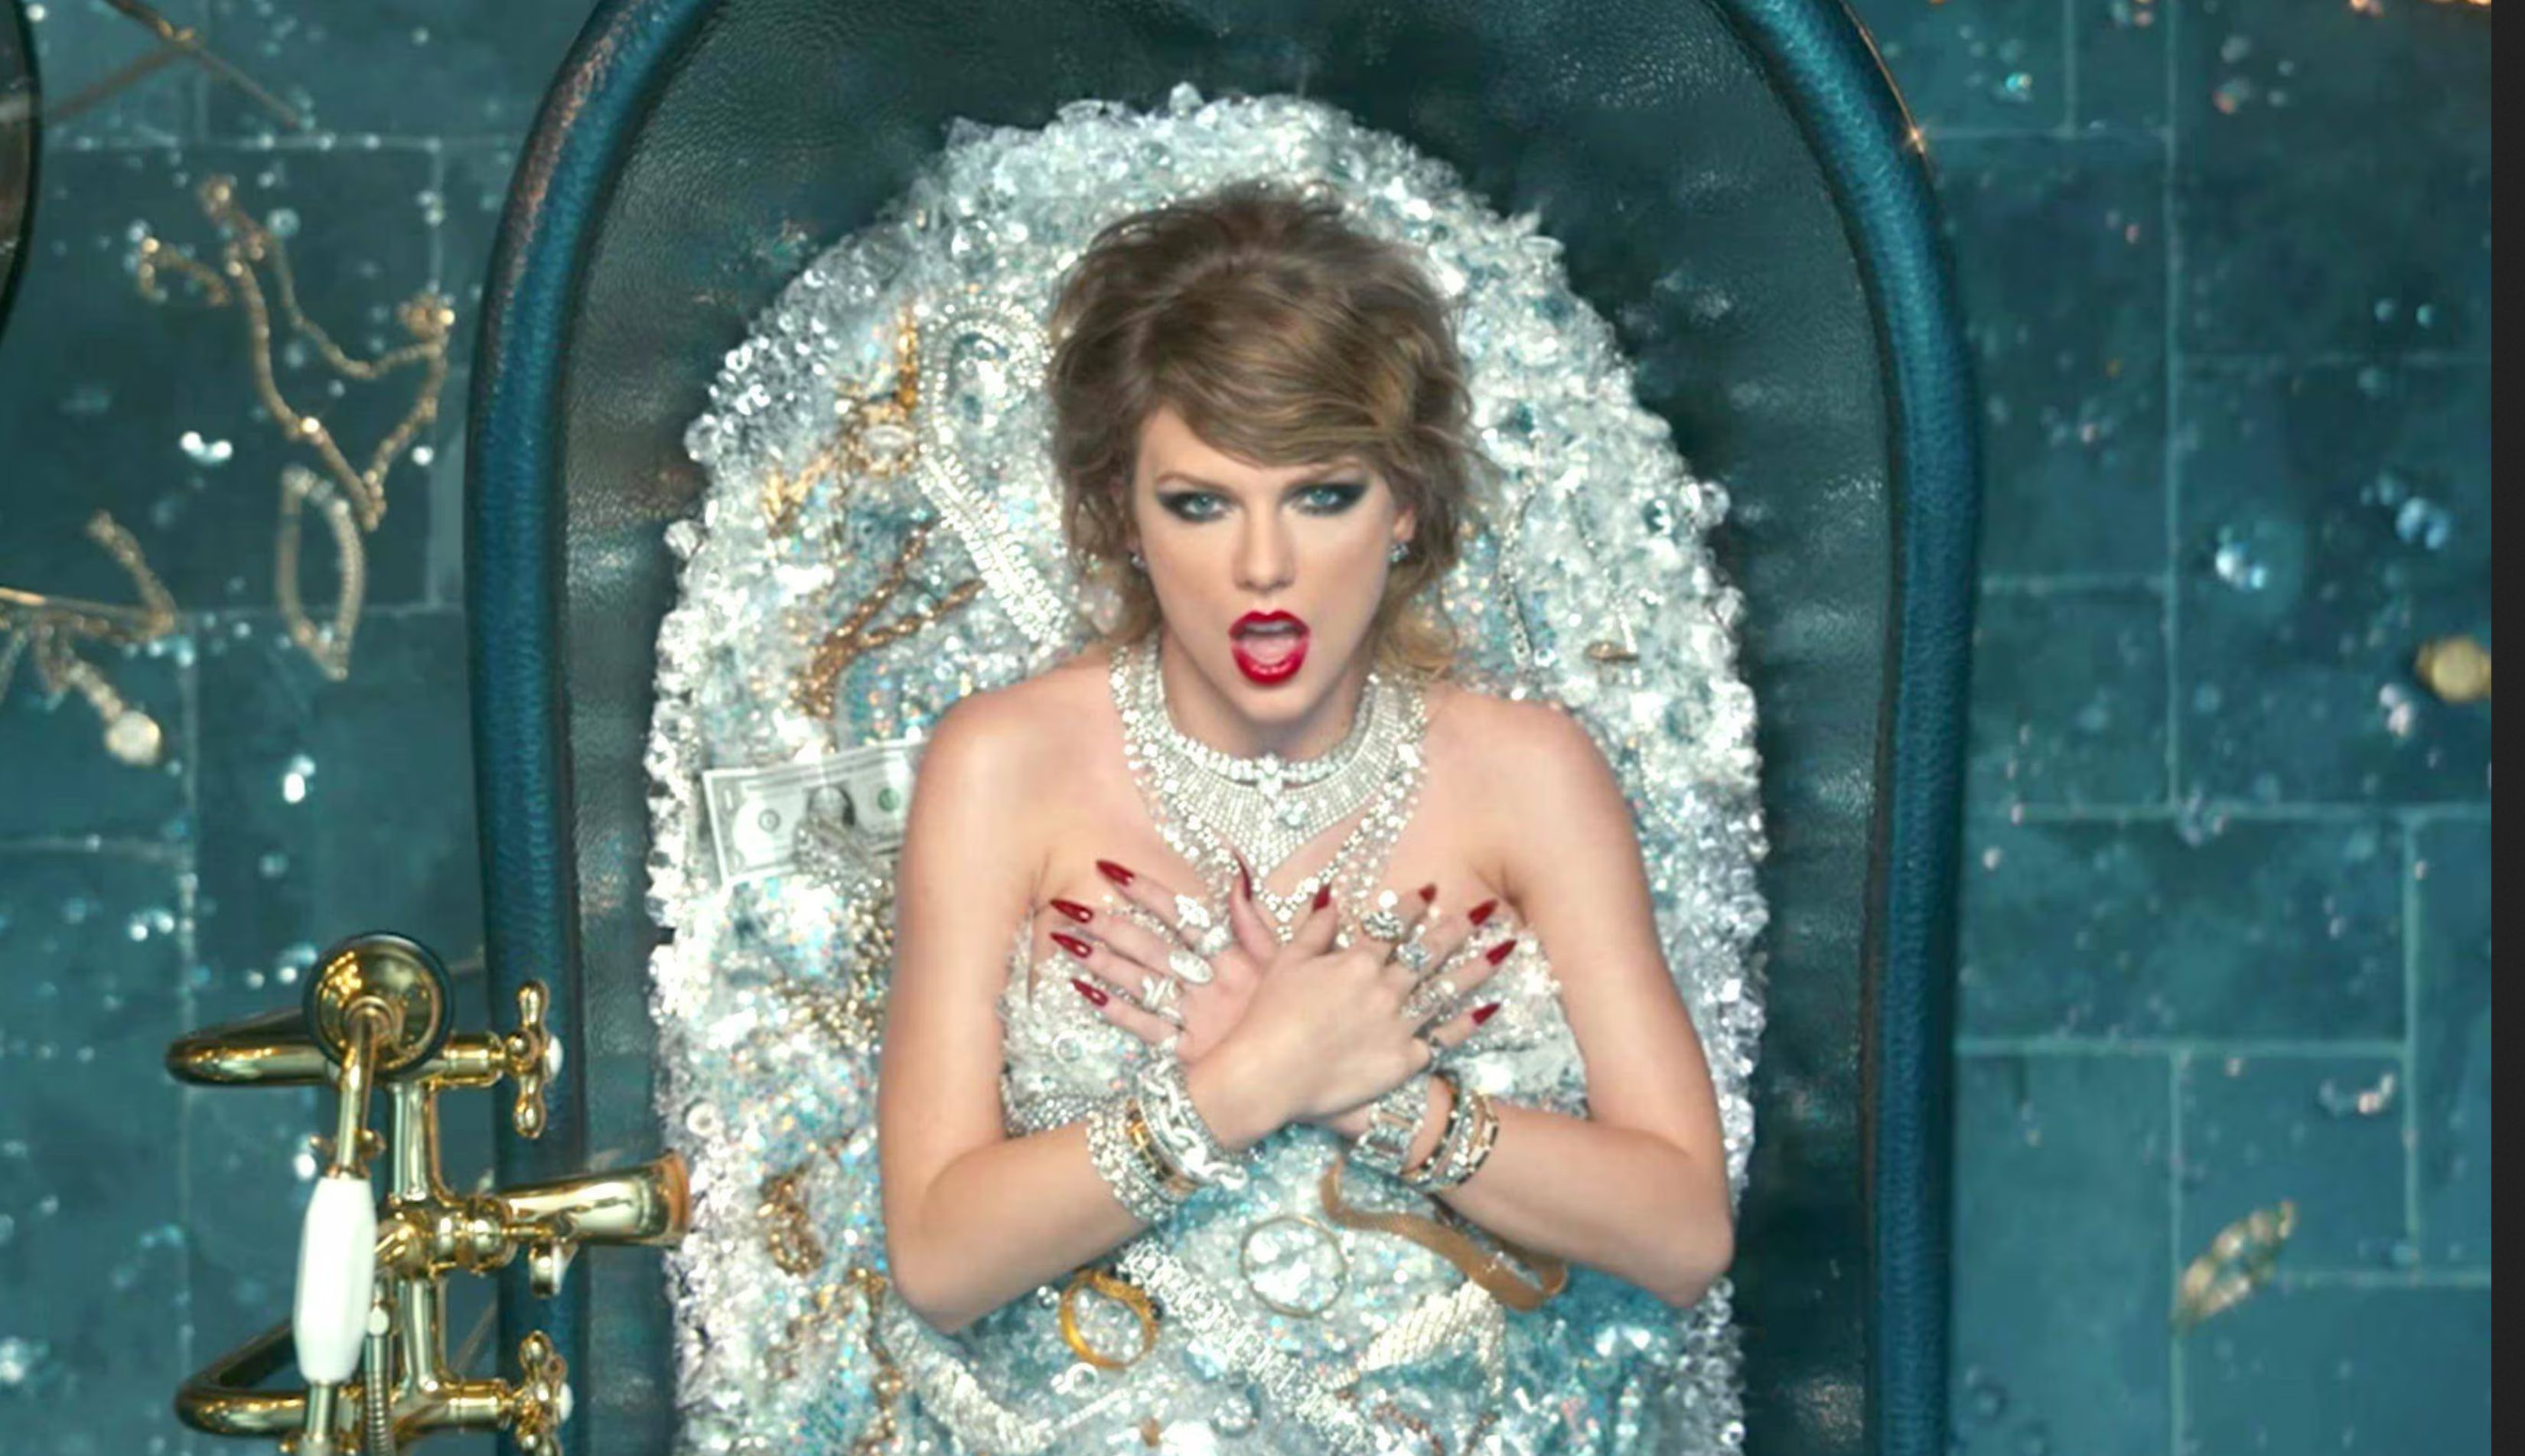 Photo of Taylor Swift in a bathtub full of money and jewels.